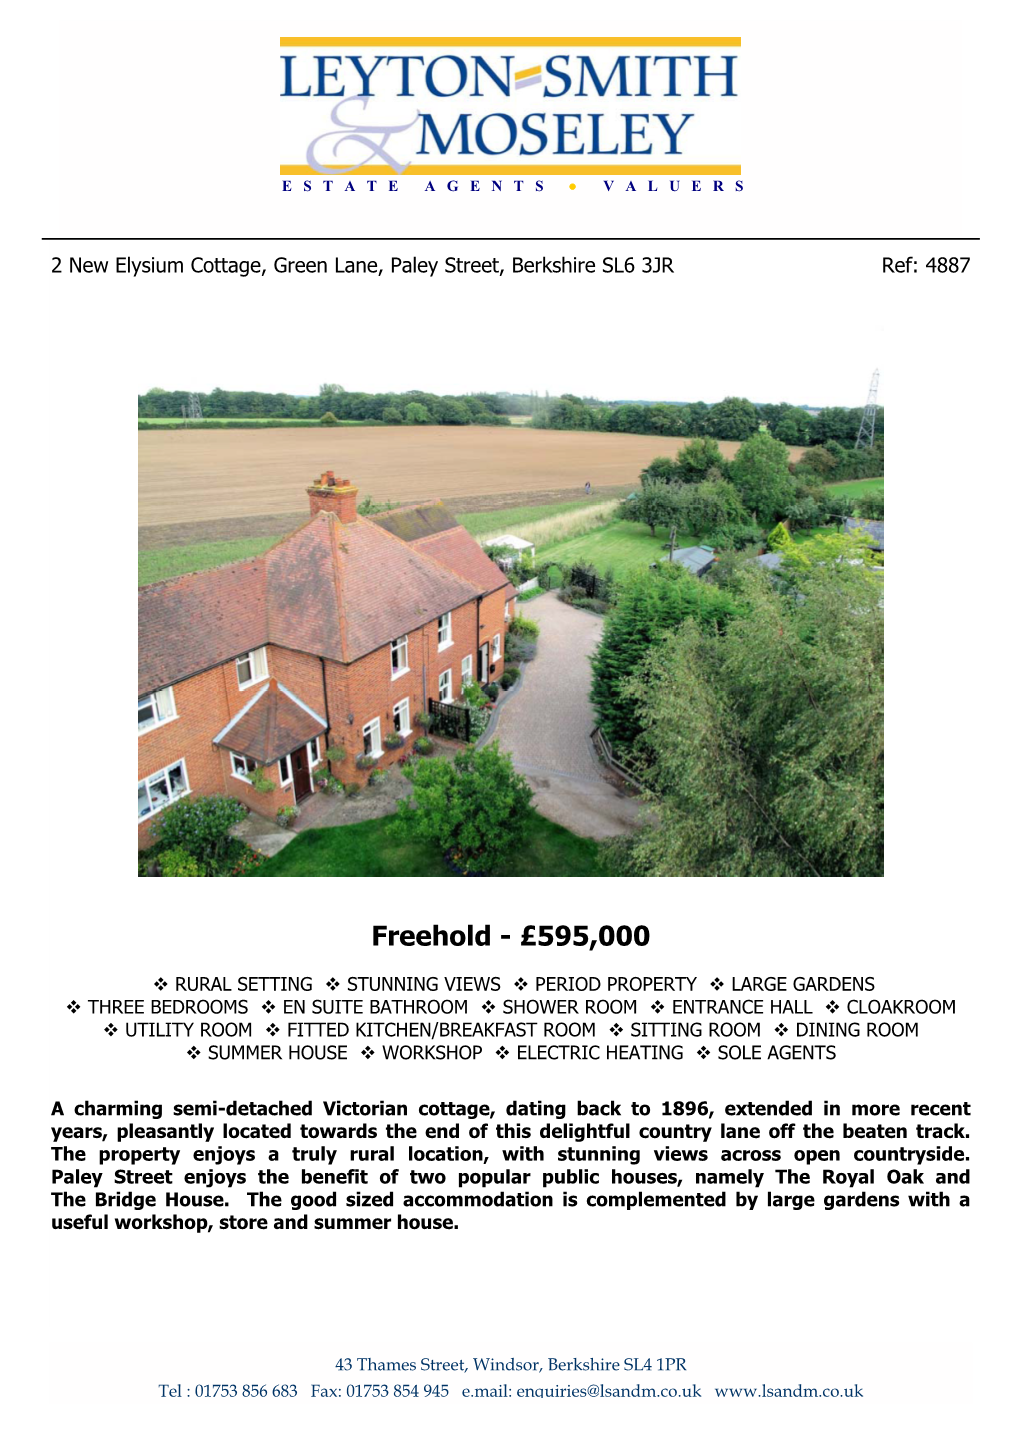 Freehold - £595,000